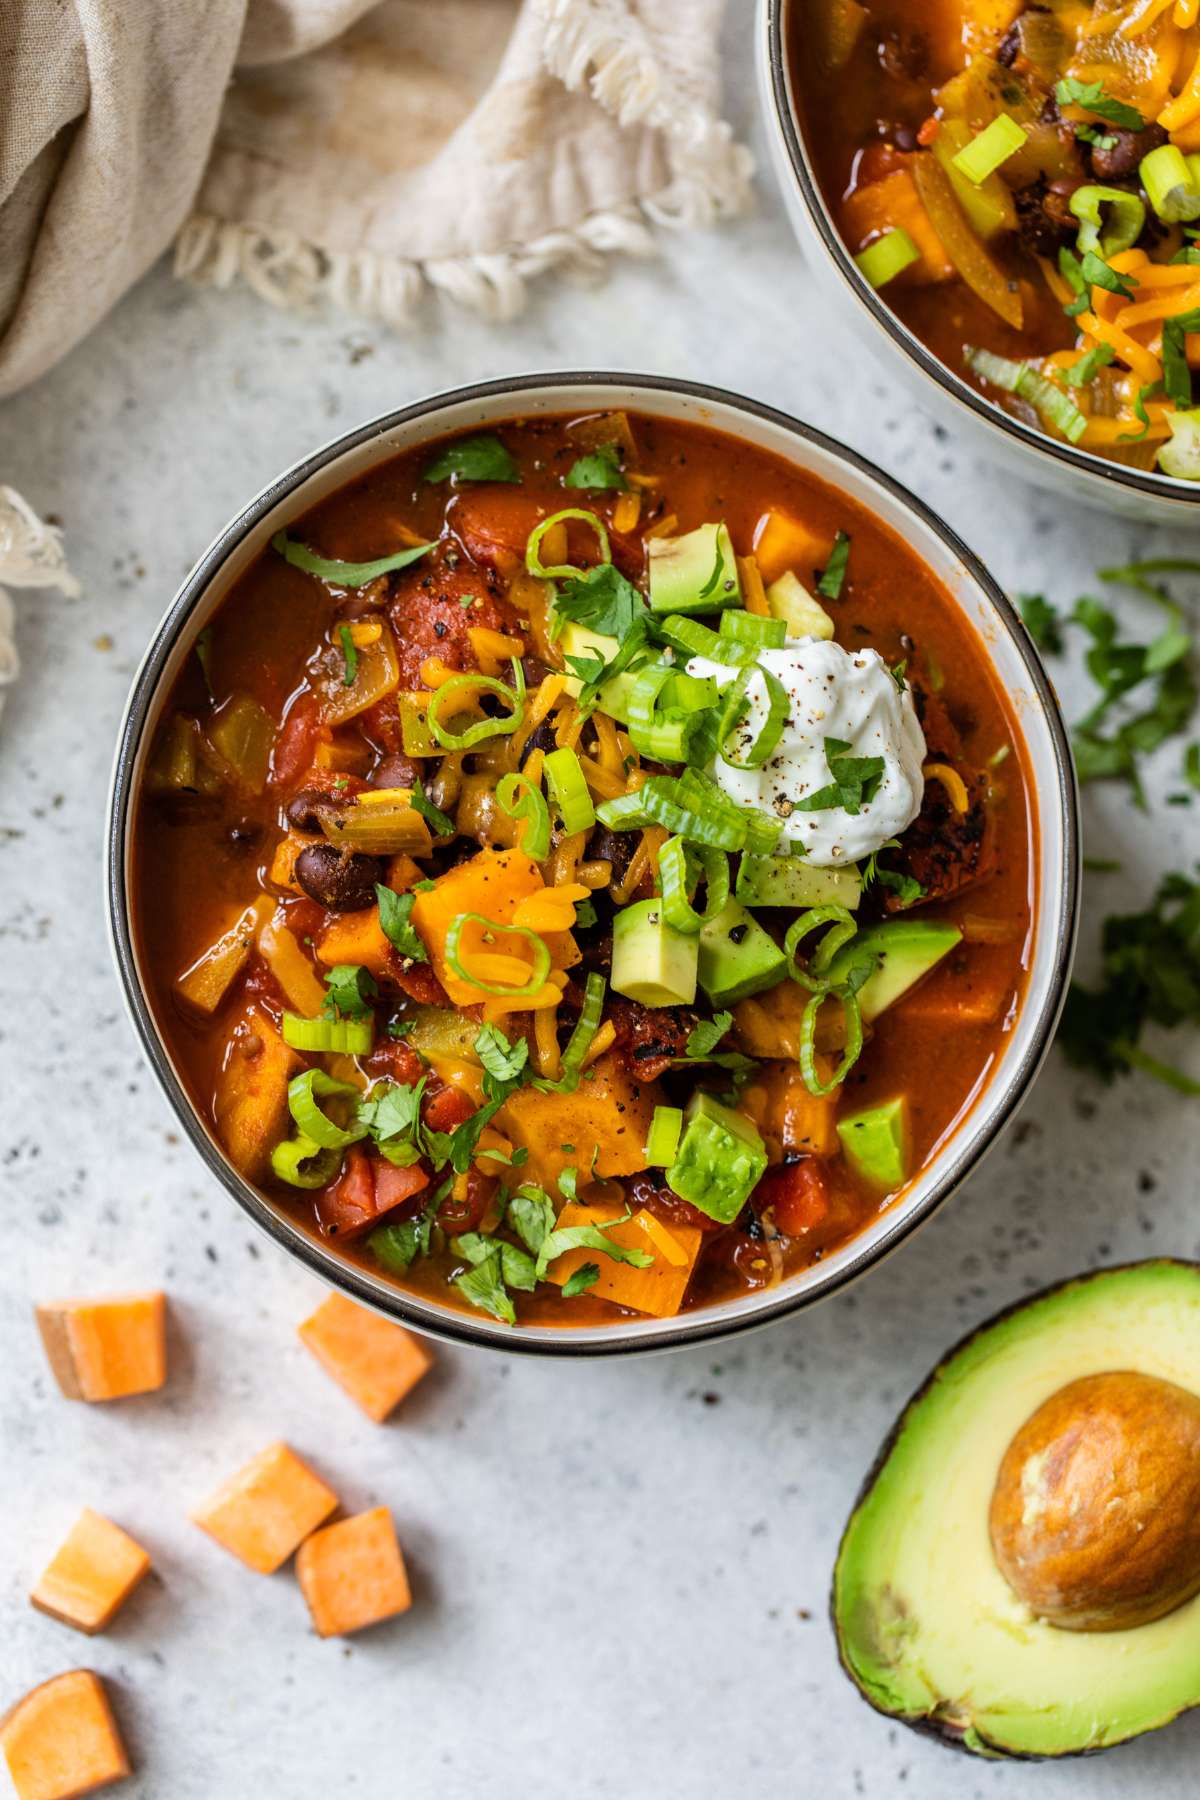 Chili with chunks of sweet potato and black beans, topped with sour cream, green onions and avocado.